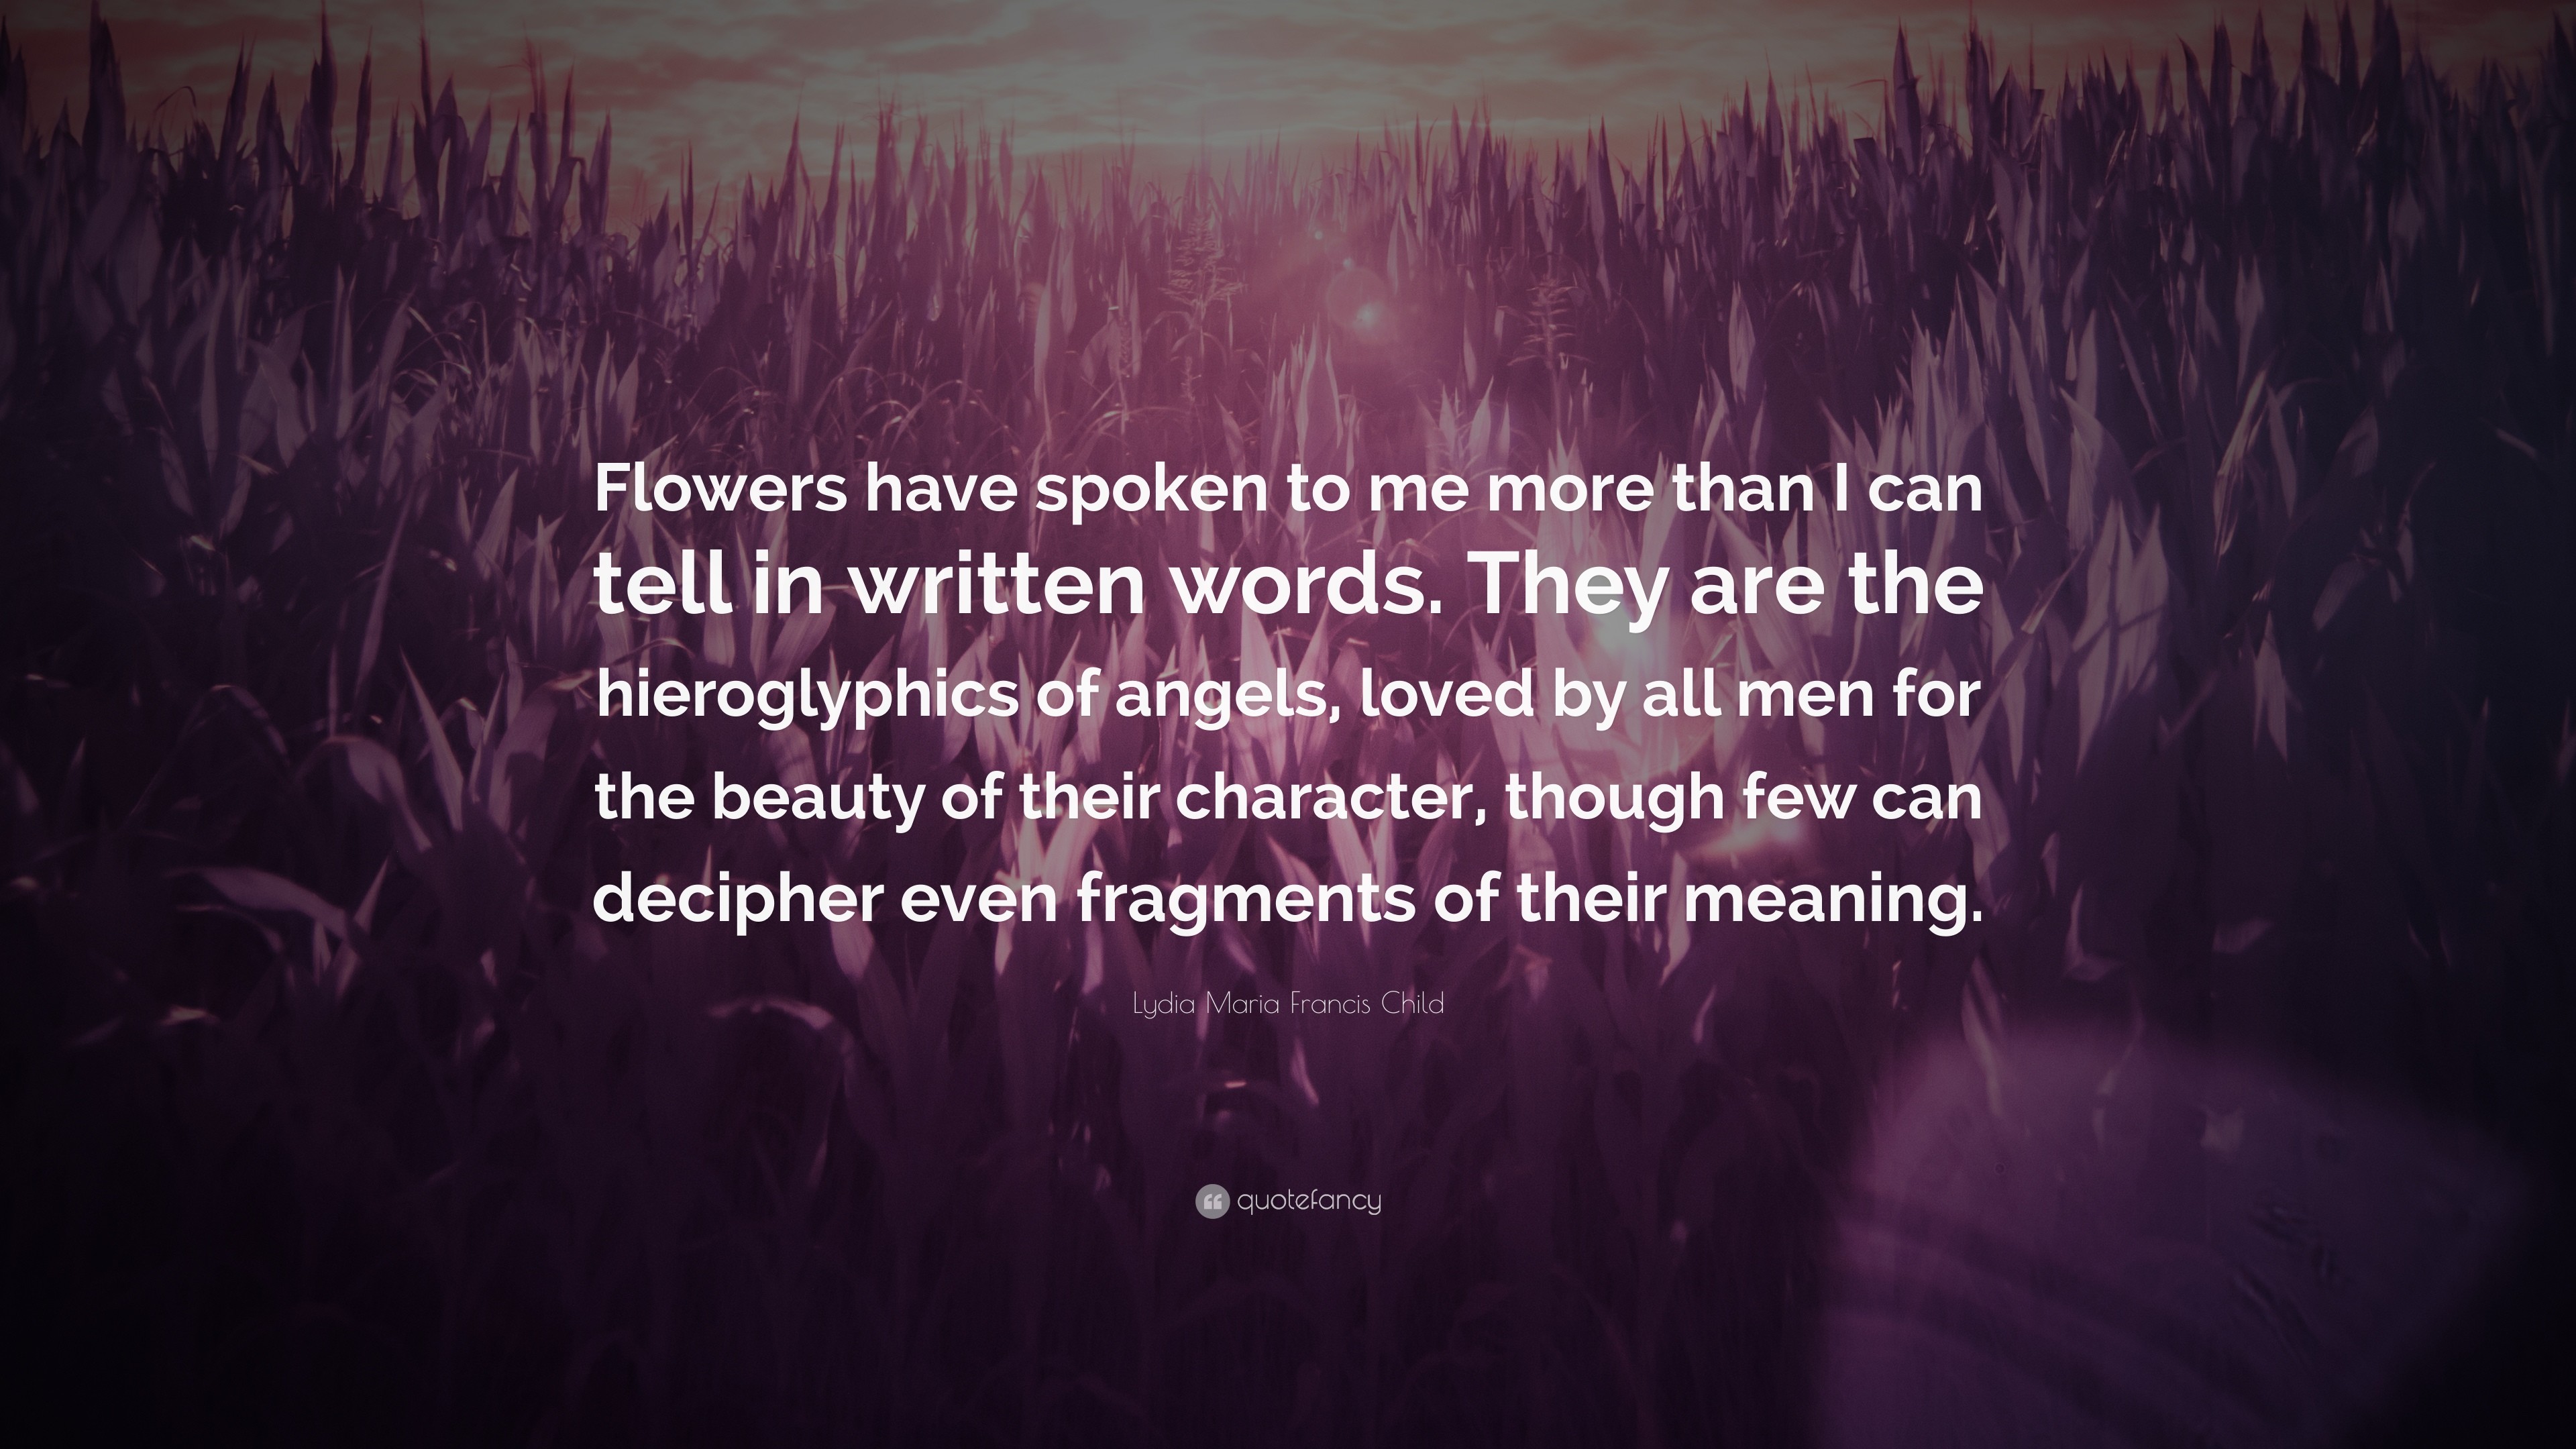 3840x2160 Lydia Maria Francis Child Quote: “Flowers have spoken to me more than I can